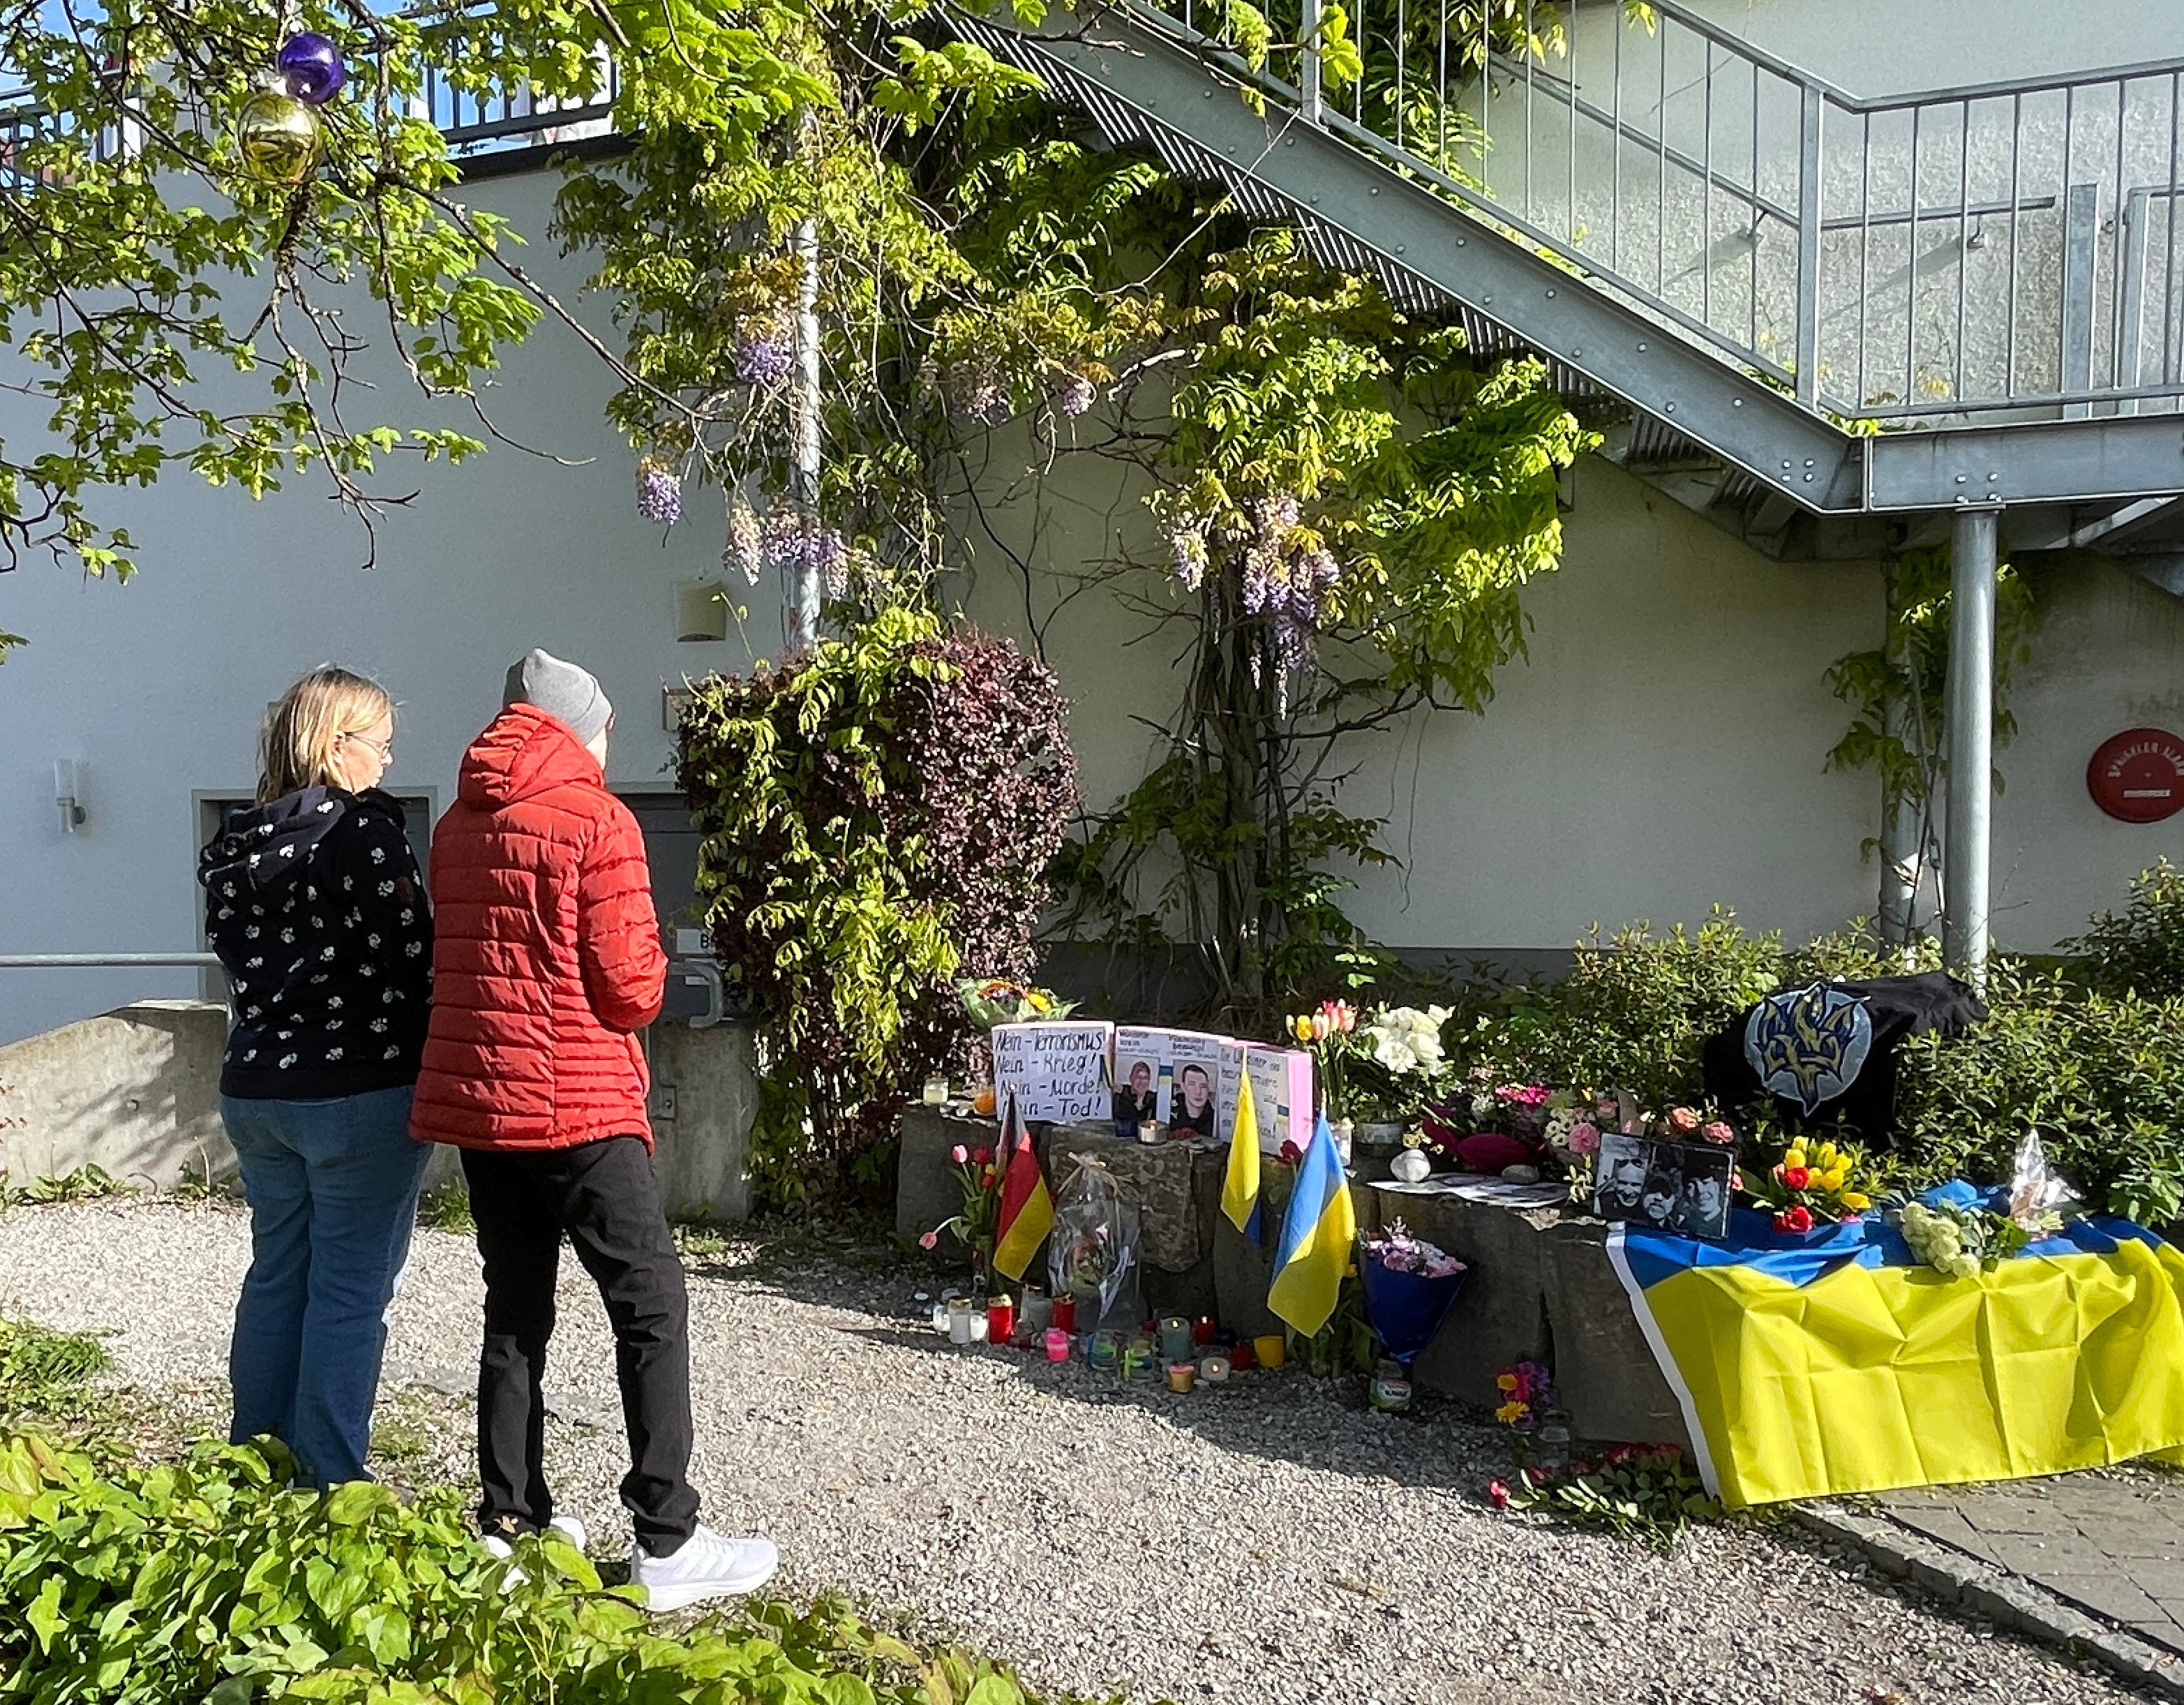 Residents mourn the death of two Ukrainian soldiers in the small southern town of Murnau, Germany